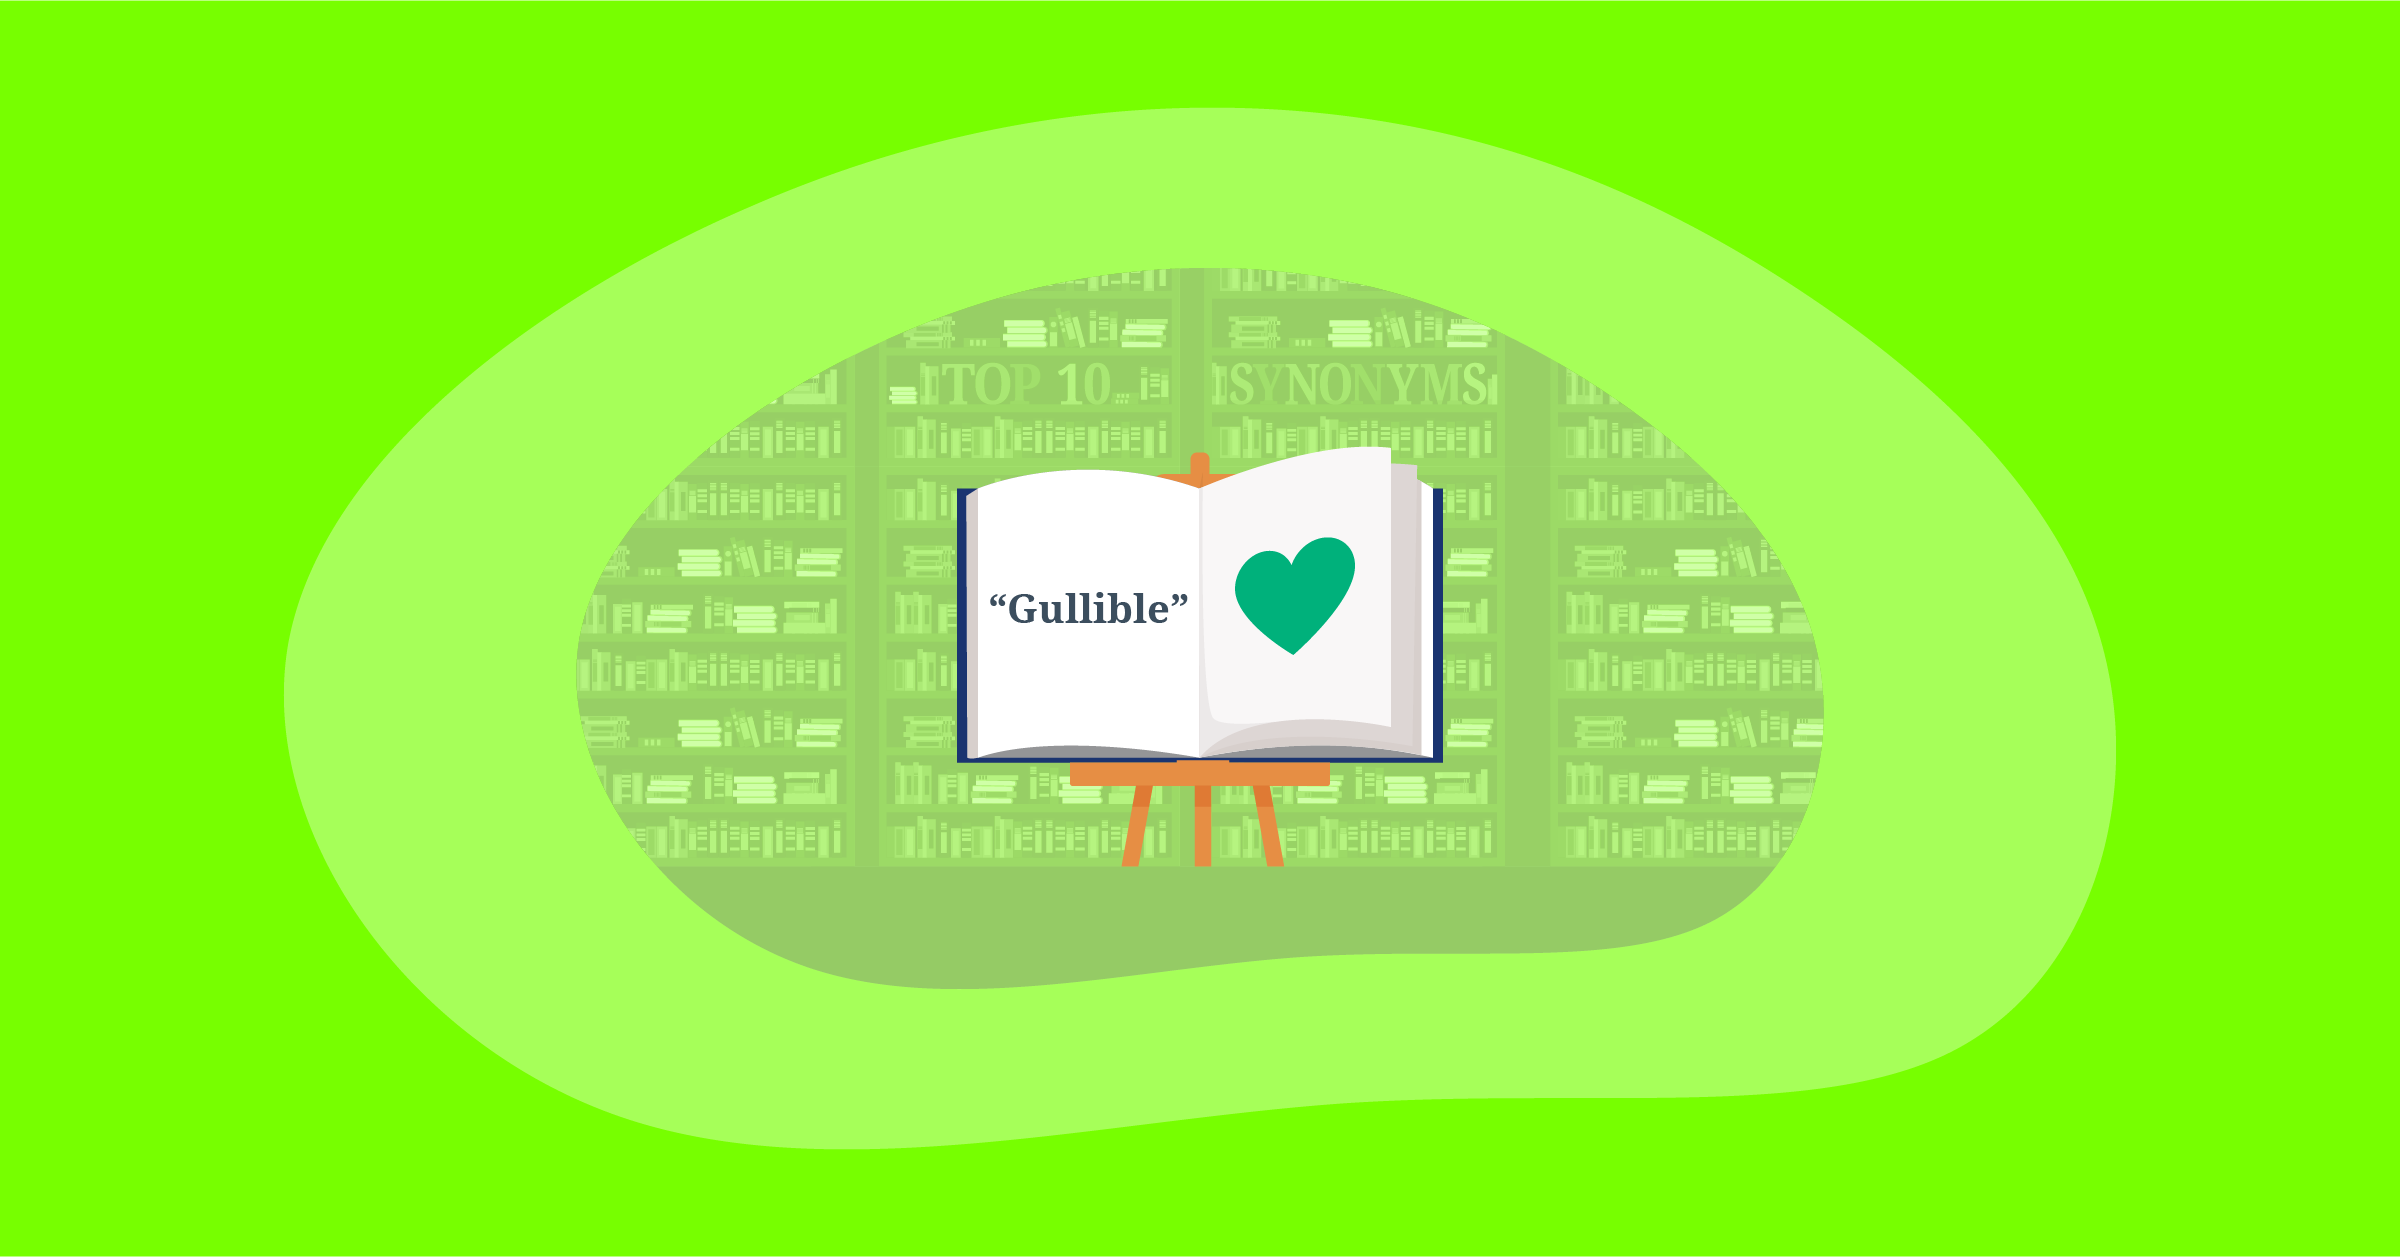 Illustration for top 10 positive impactful words for "Gullible"